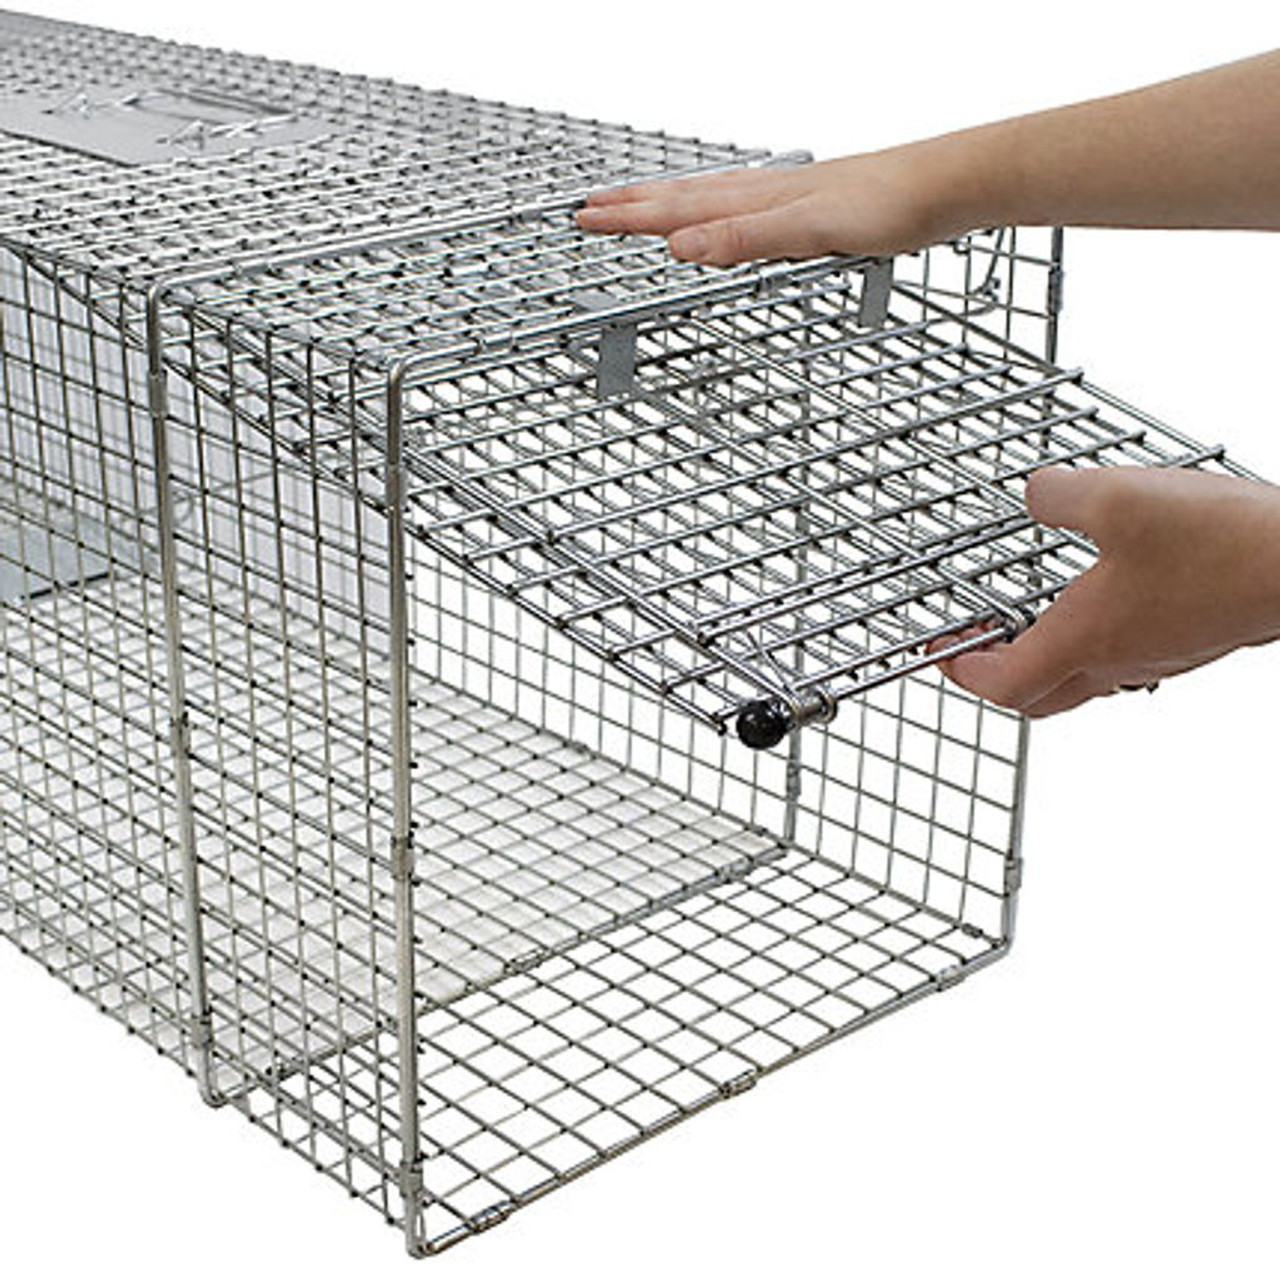 Havahart 2-Door Large Animal Trap at Tractor Supply Co.